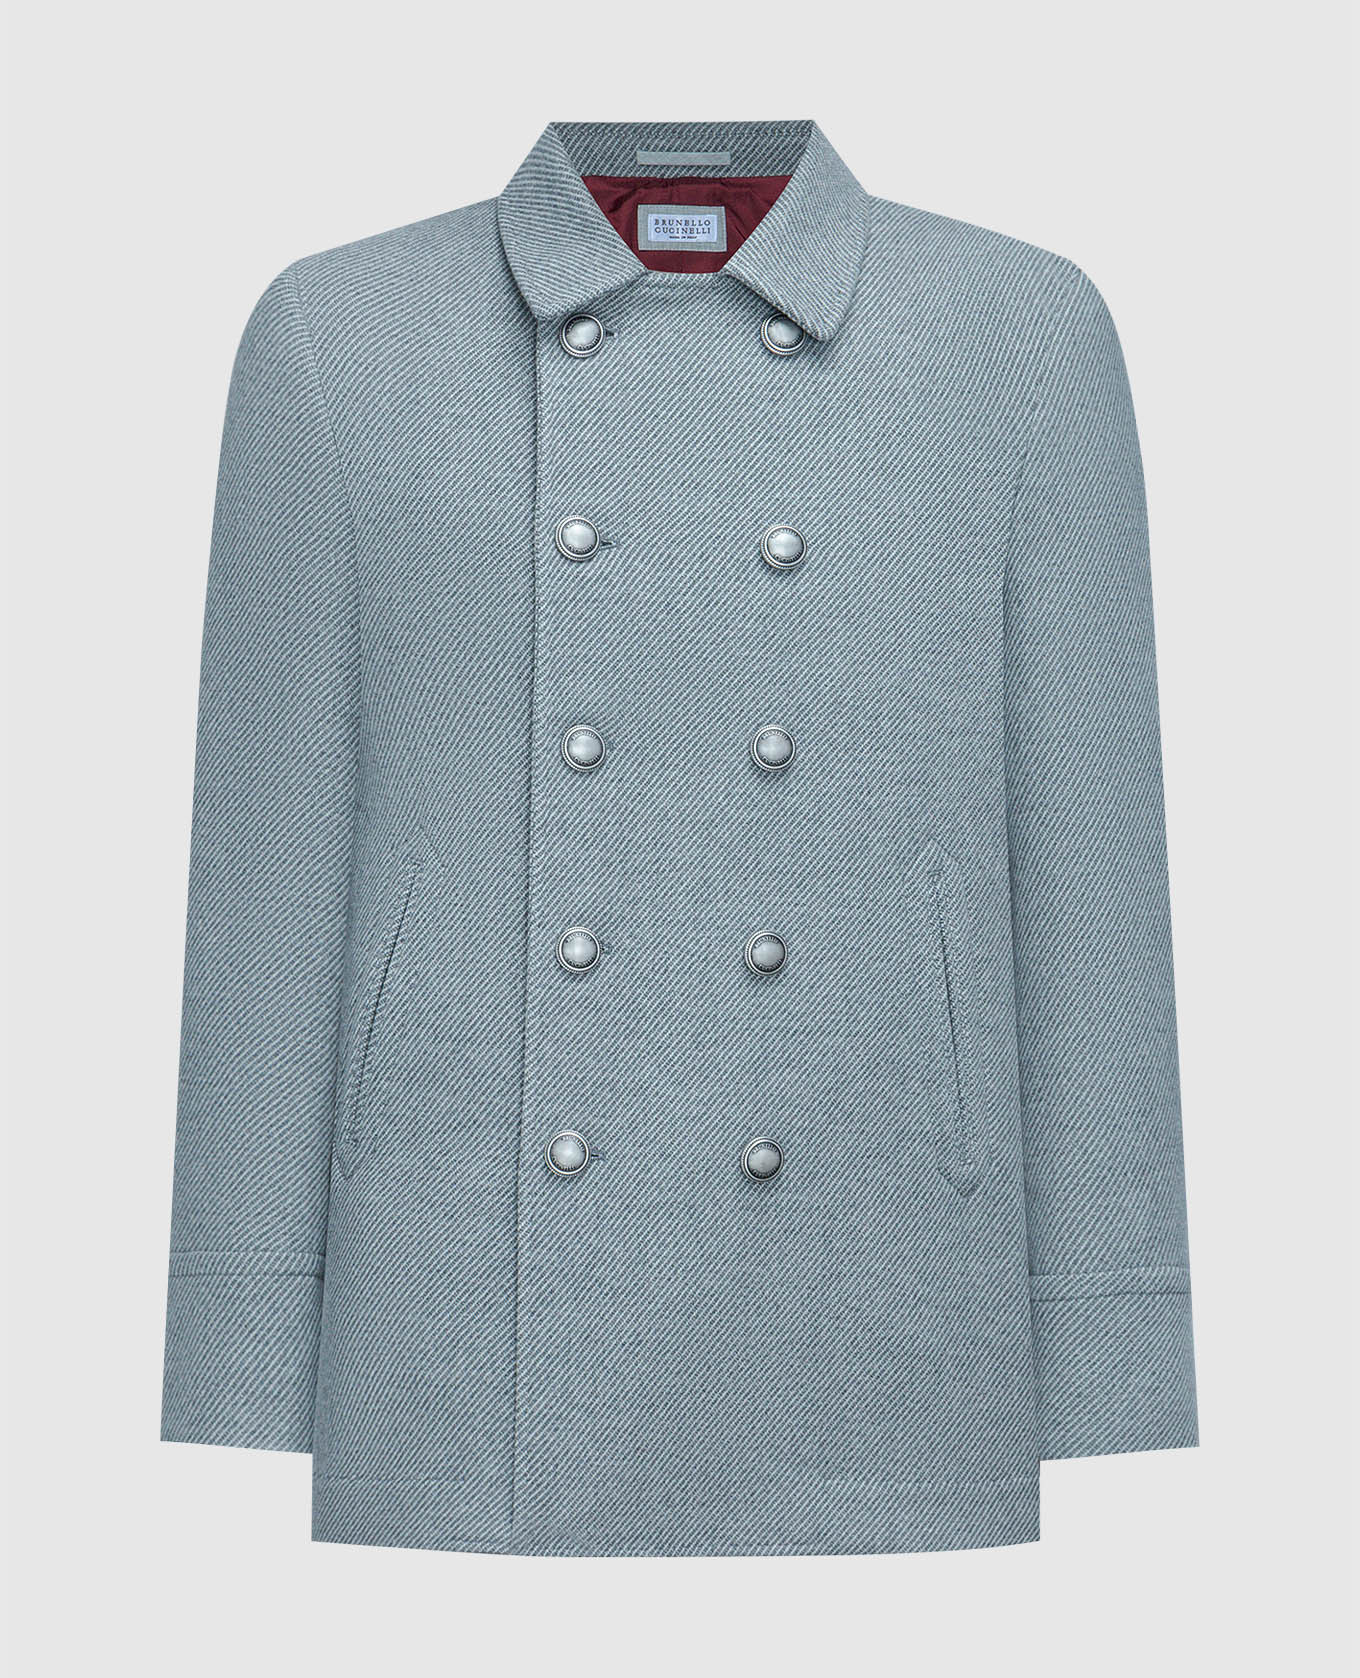 Gray double-breasted short coat made of wool and cashmere